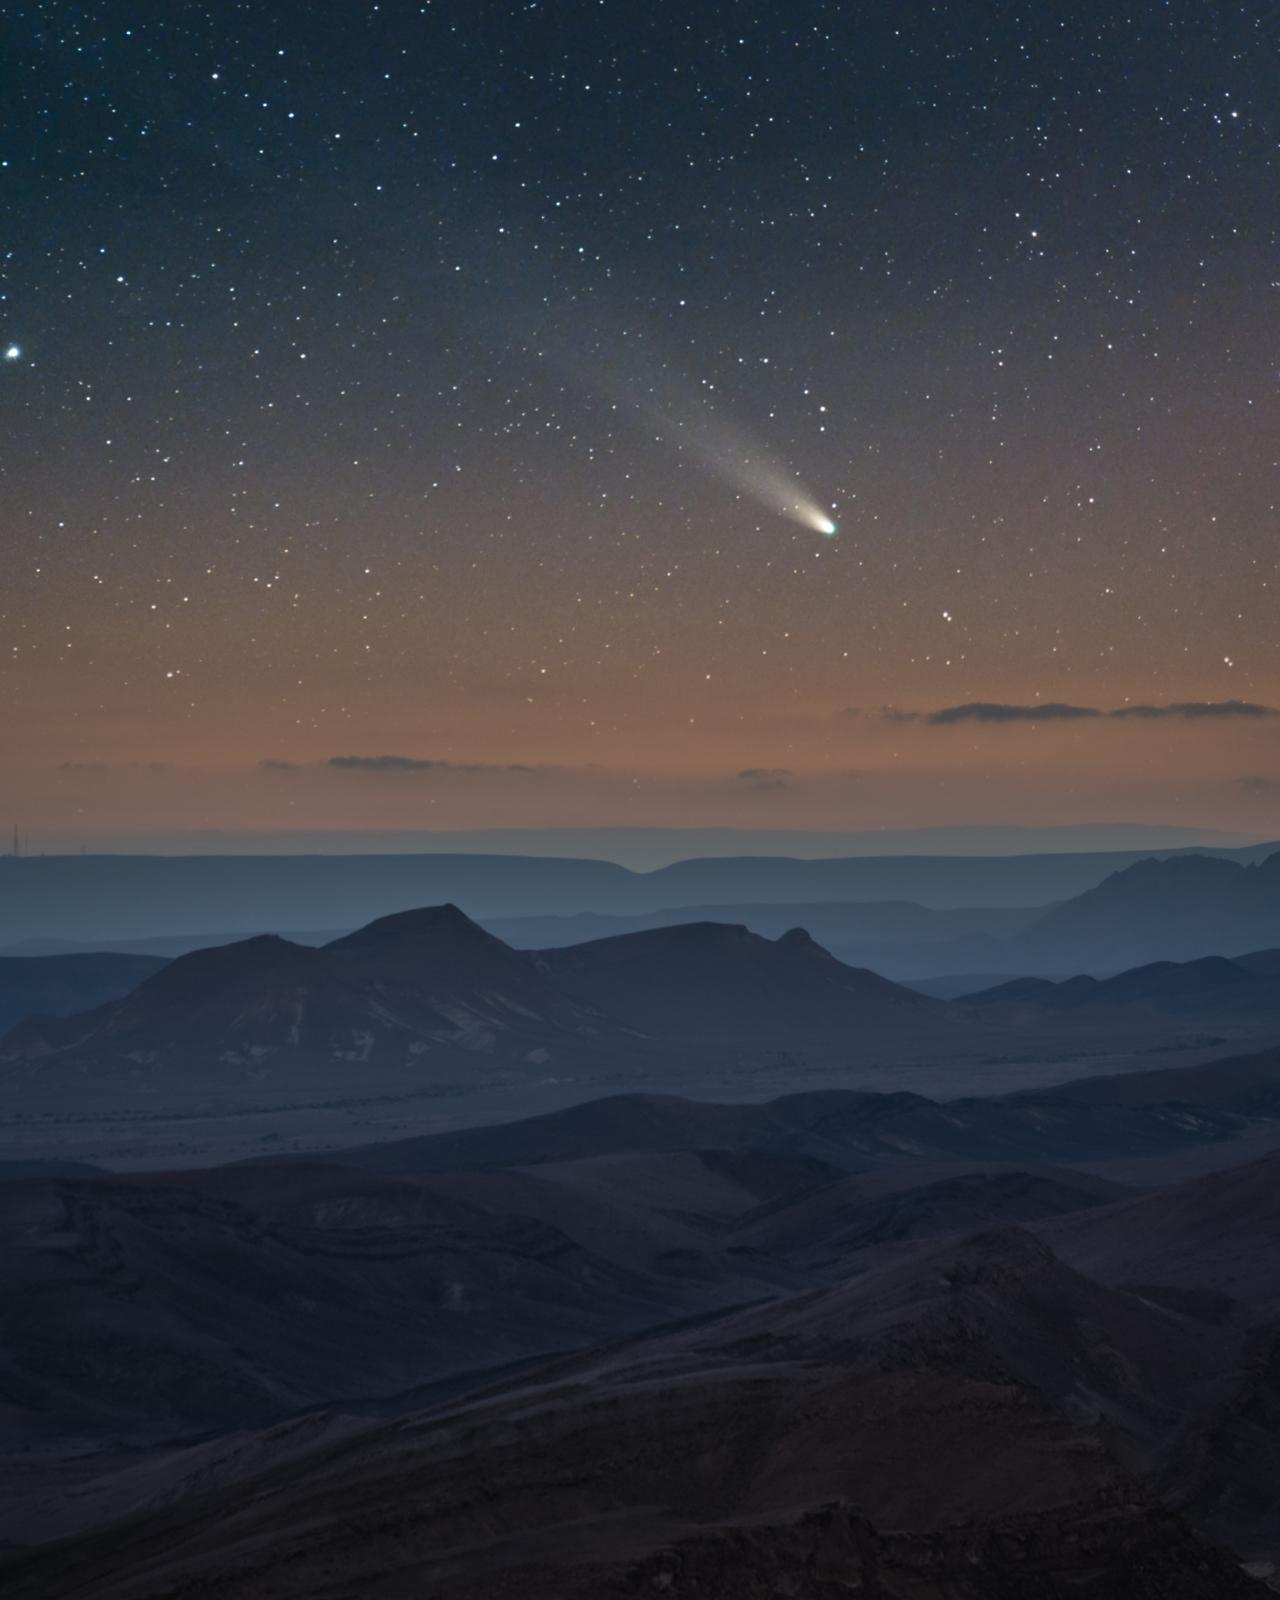 Photograph of a comet entering the Earth's atmosphere. A rocky landscape occupies the bottom half of the frame, while the bright white tail of the comet can be seen moving across the sky above